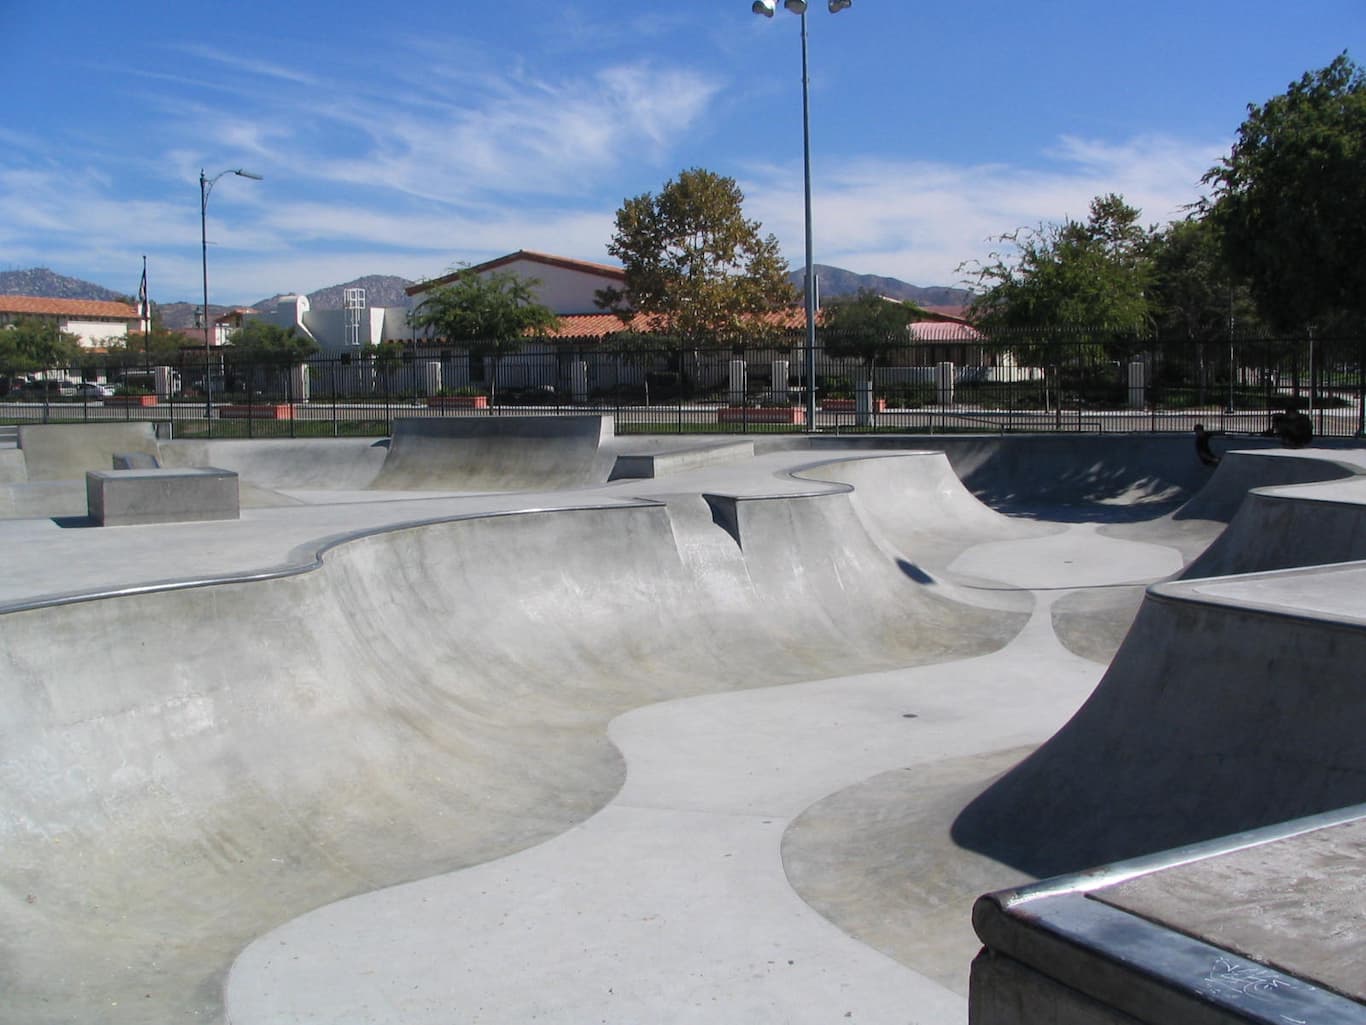 Feature photo for Poway skate park. Photo by City of Poway.